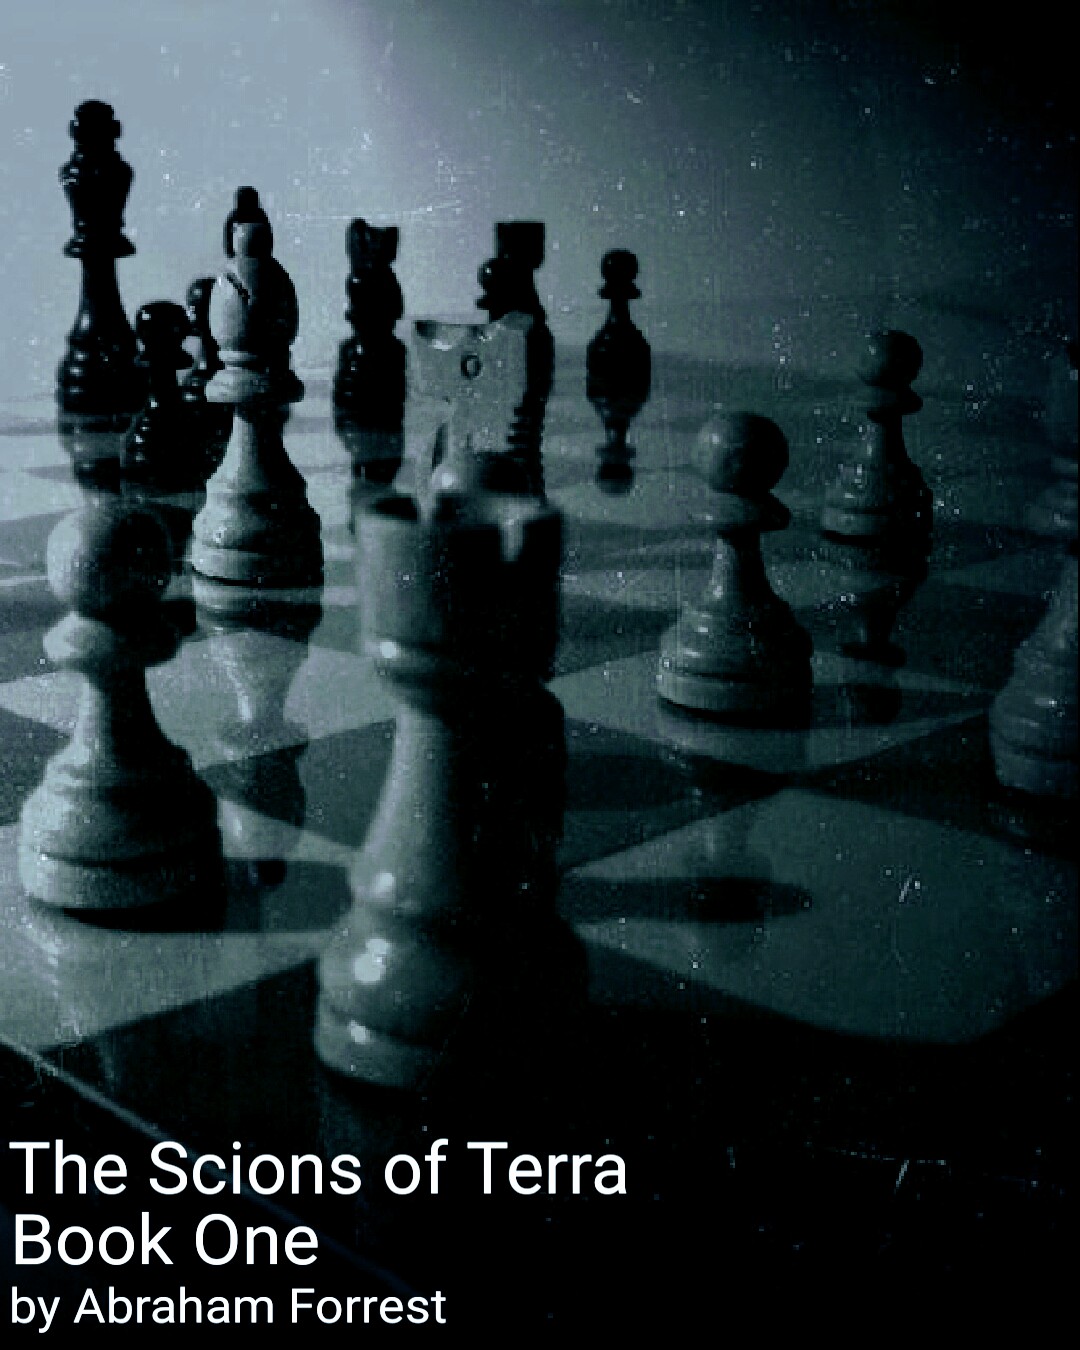 FREE: The Scions of Terra: Volume I by Abraham Forrest